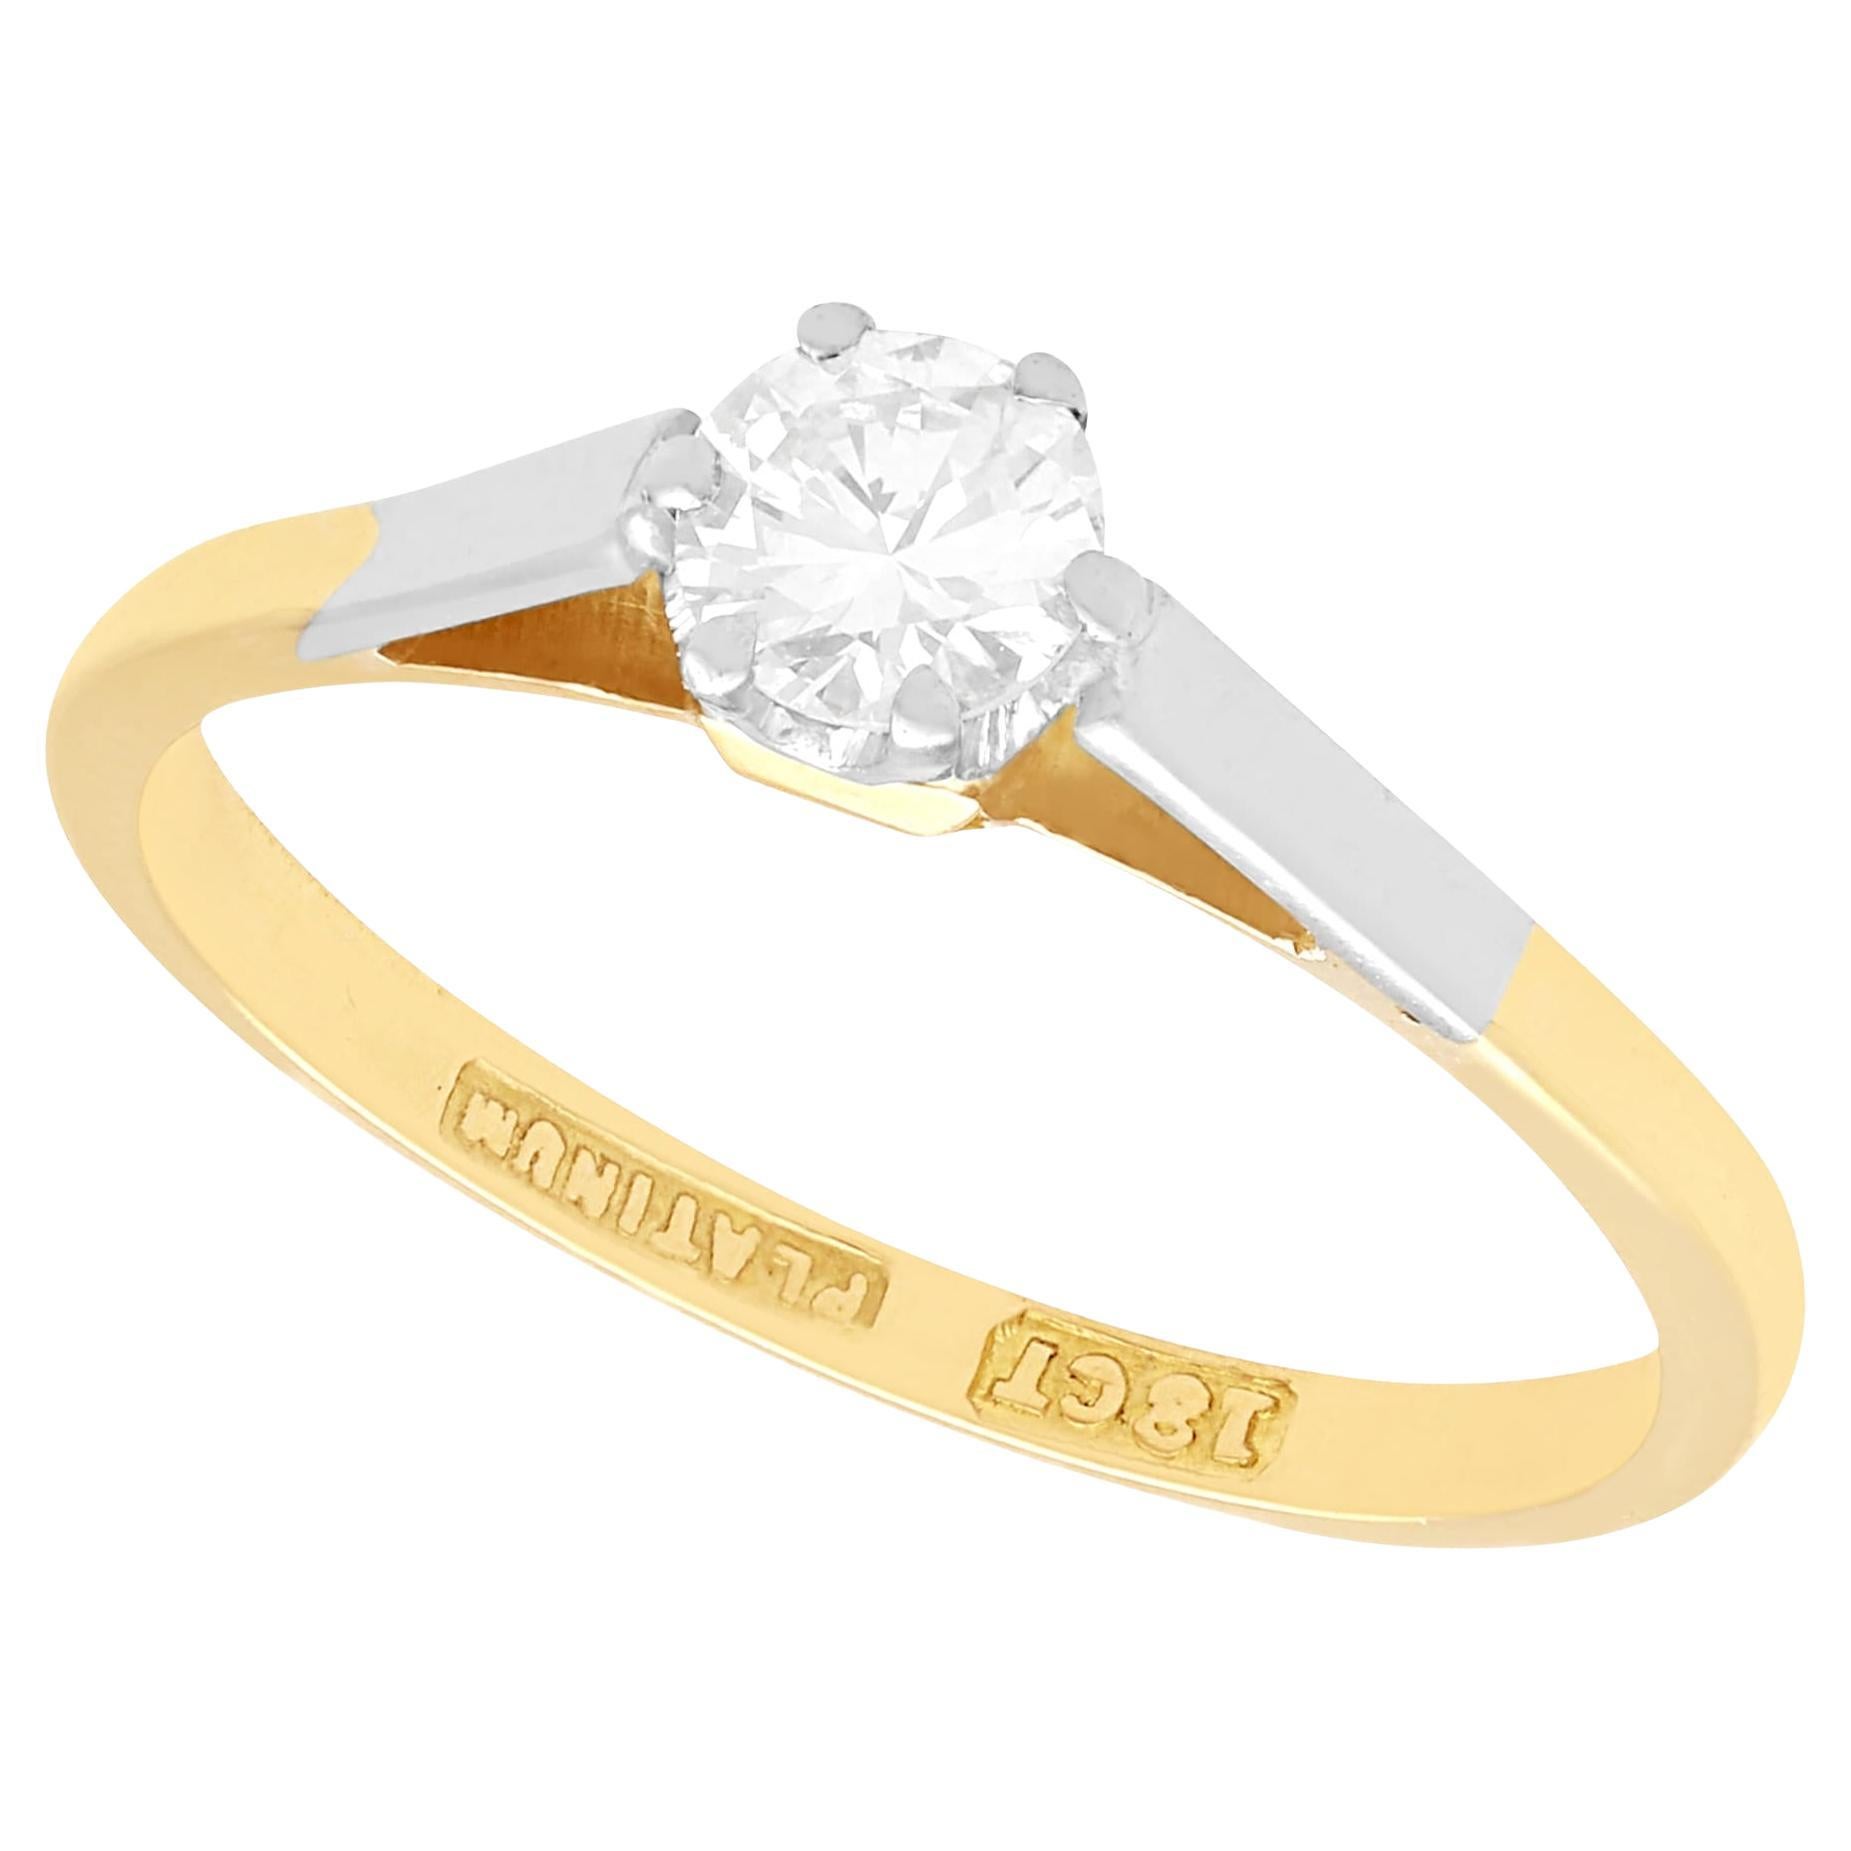 Vintage Diamond and Yellow Gold Solitaire Engagement Ring, Circa 1950 For Sale